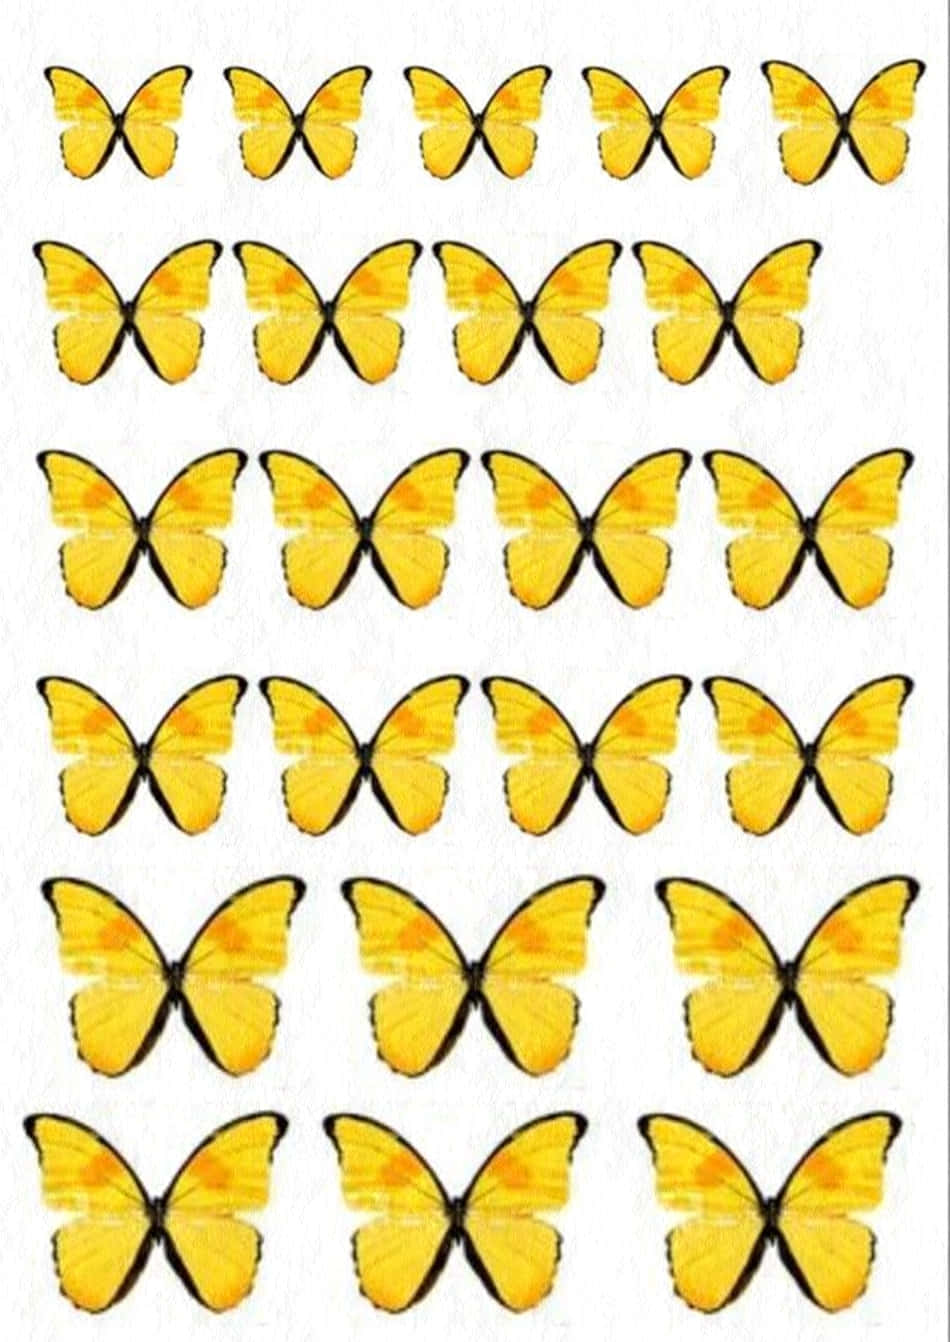 Brighten Up Your Day with Cute Yellow Butterflies Wallpaper